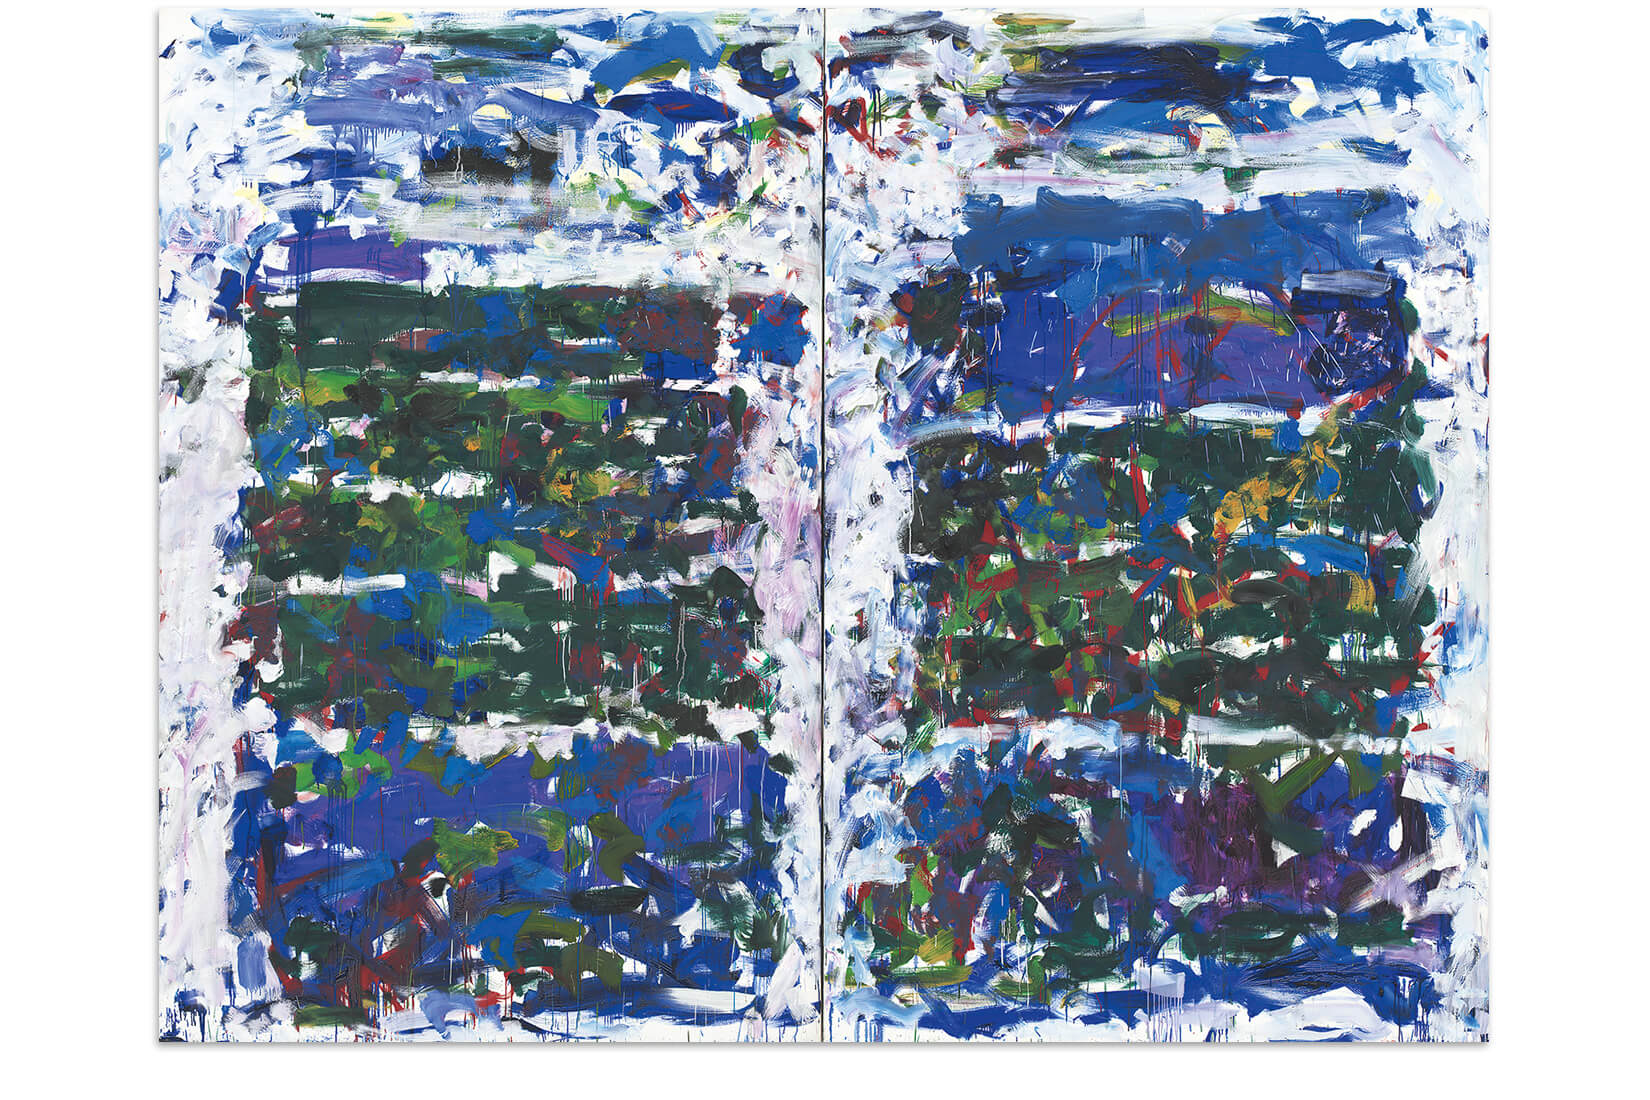 A diptych painting entitled "Champs", from 1990 by artist Joan Mitchell